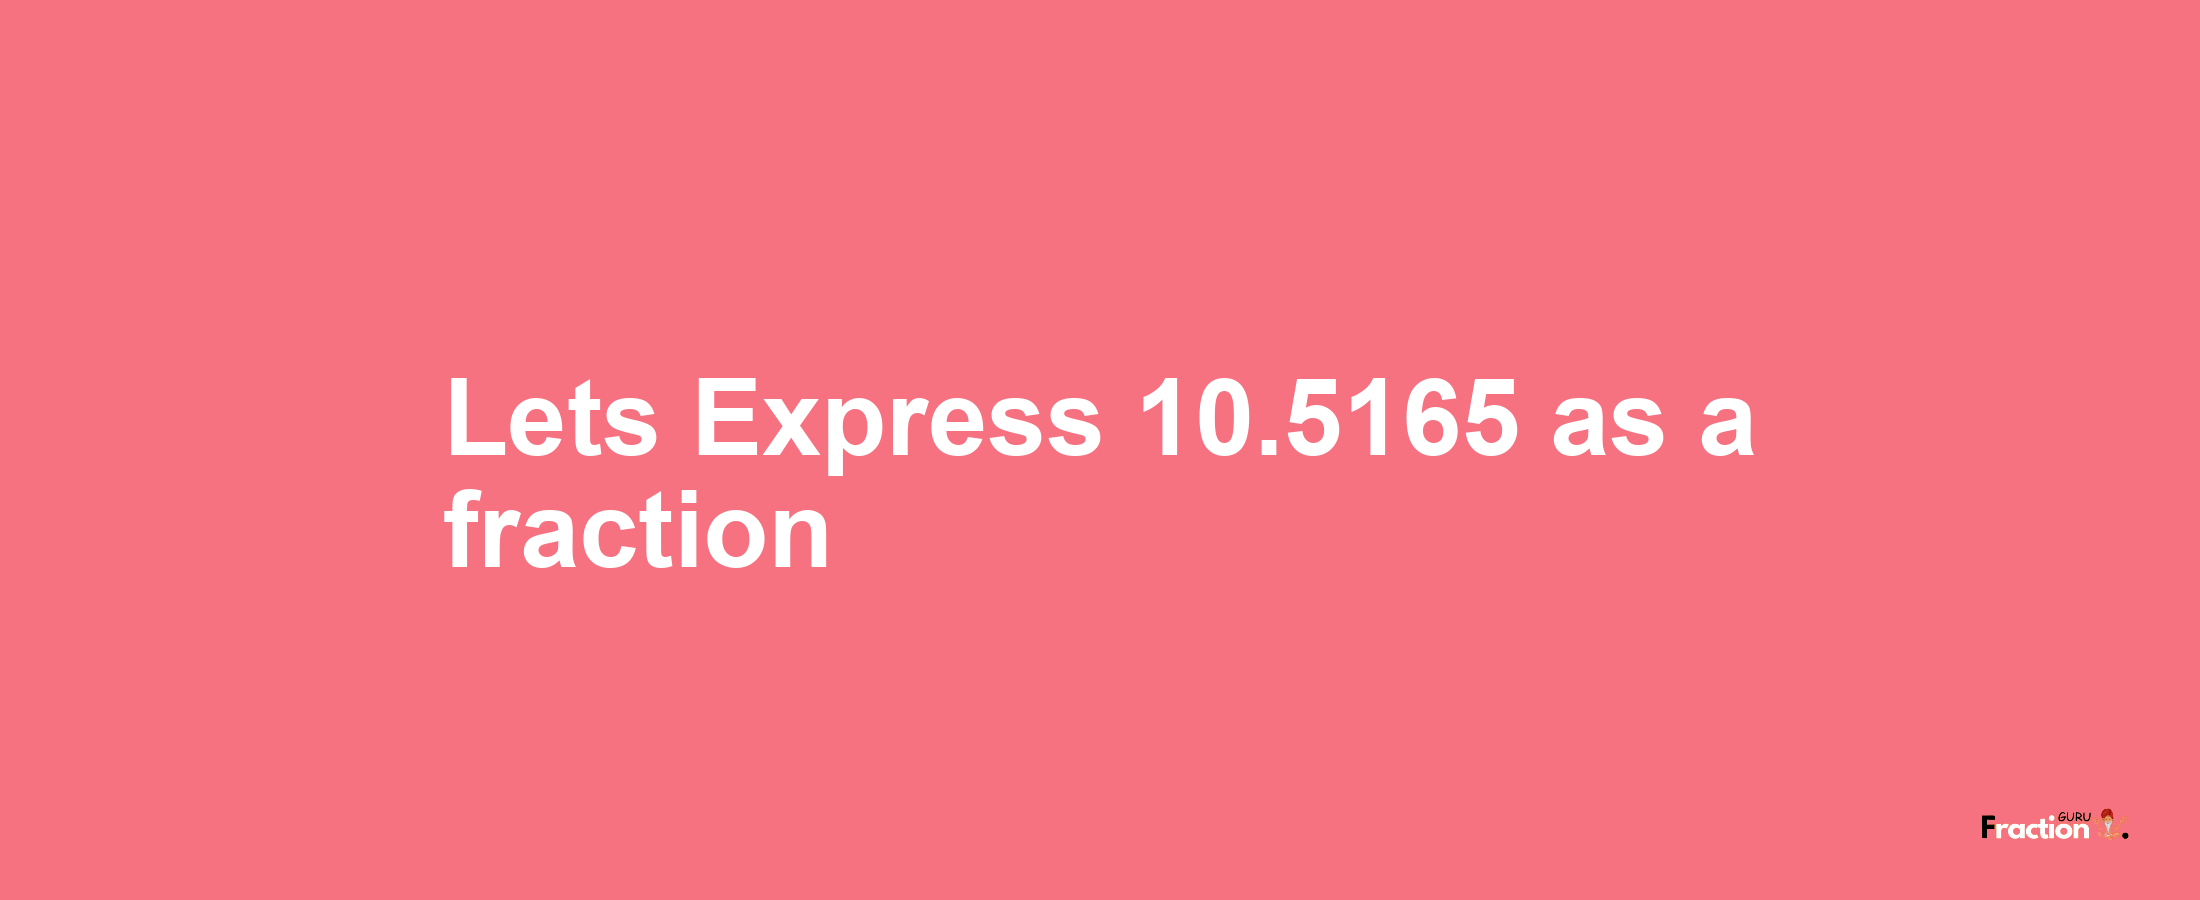 Lets Express 10.5165 as afraction